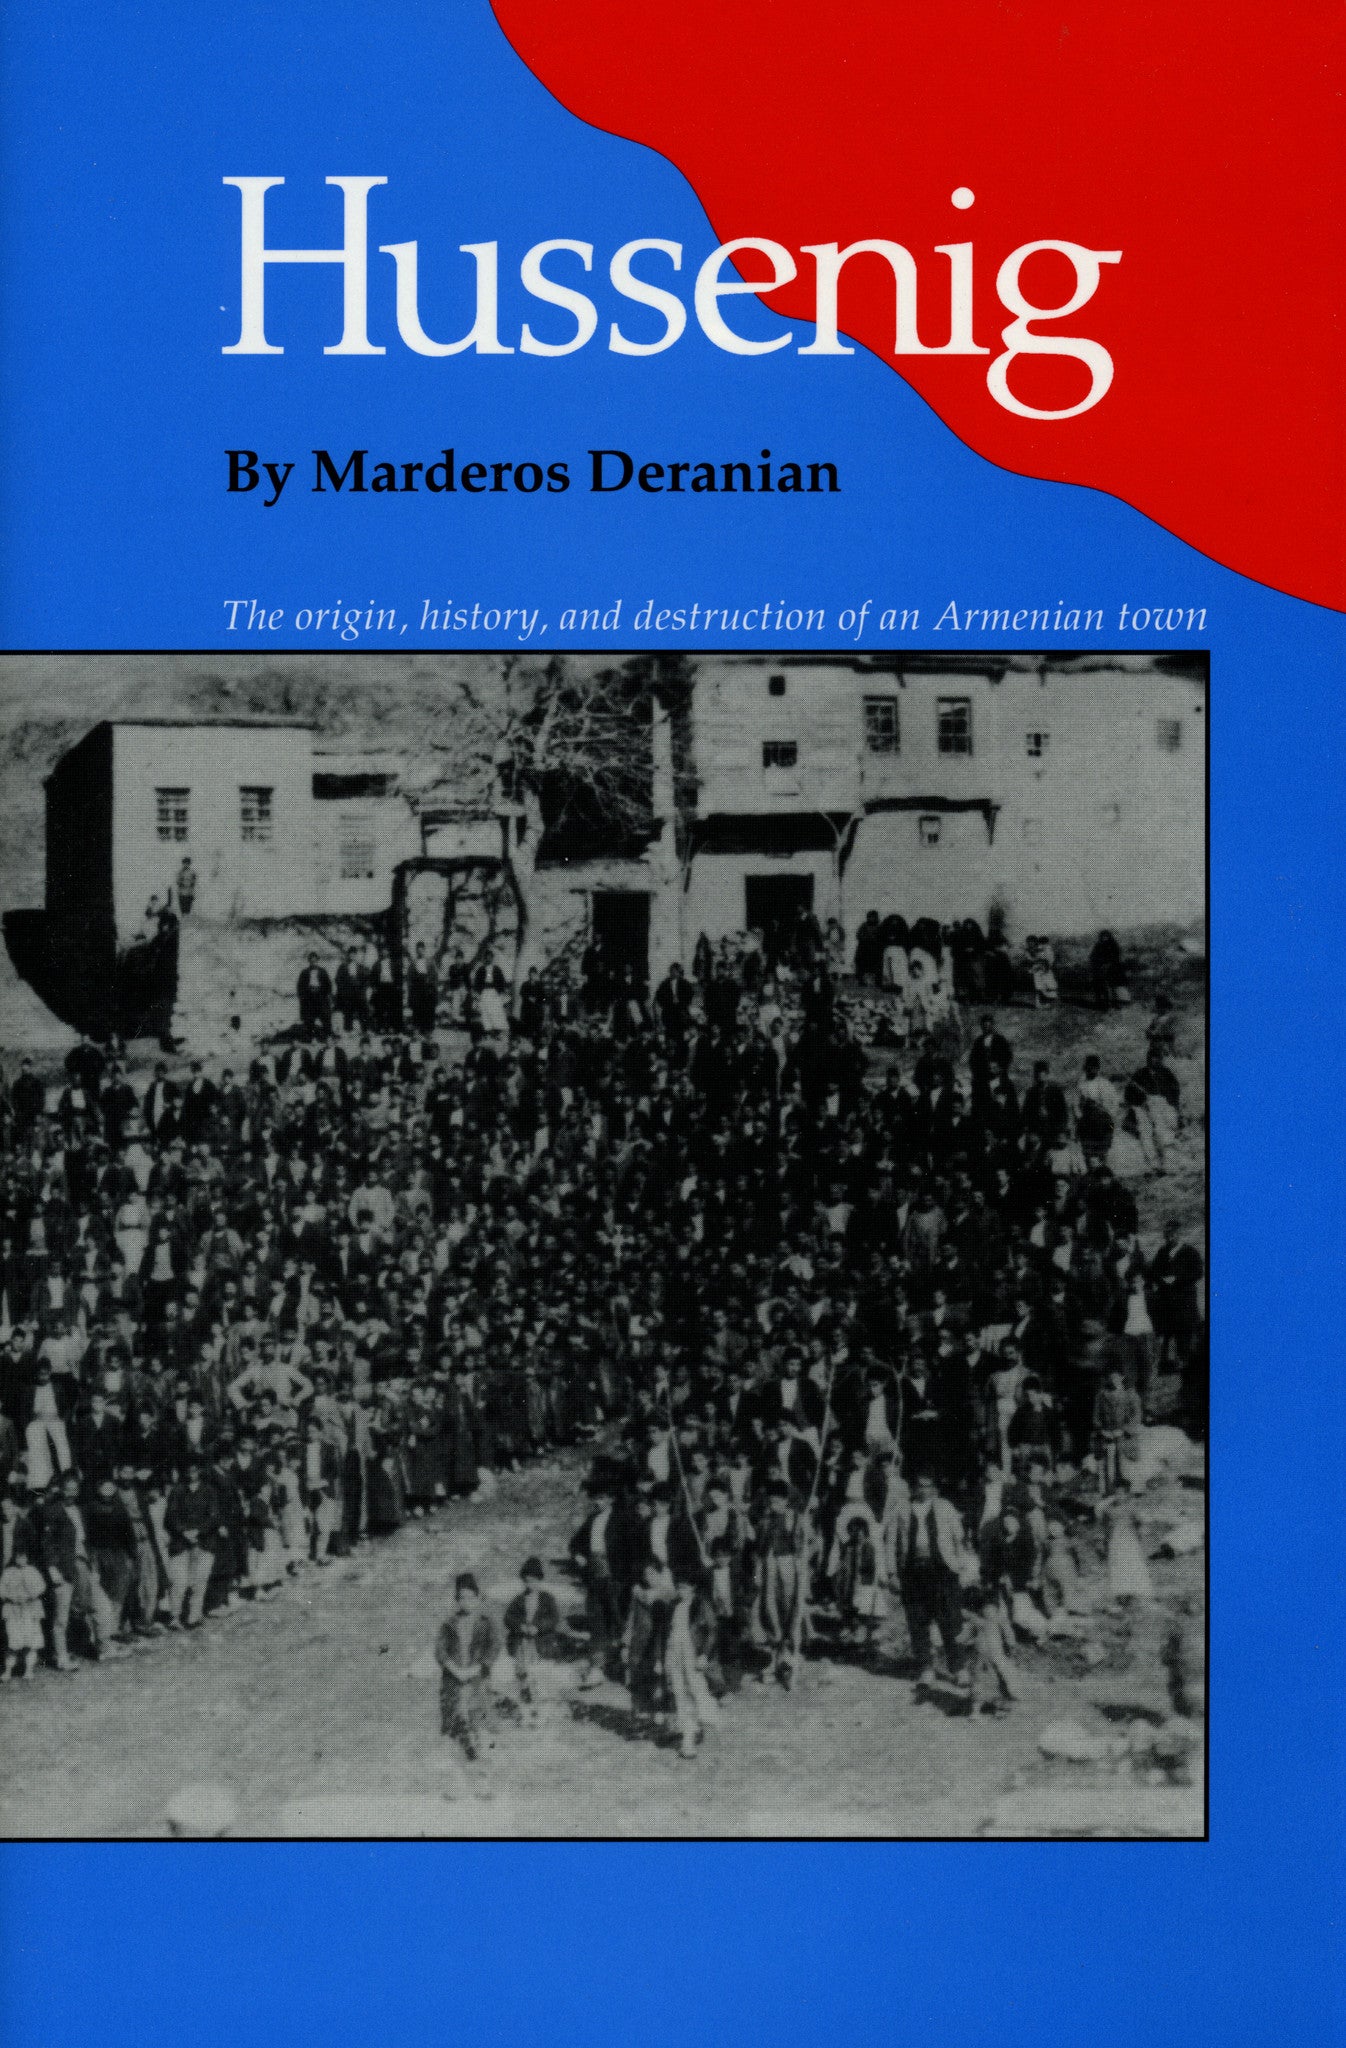 Hussenig: The Origin, History, and Destruction of an Armenian Town